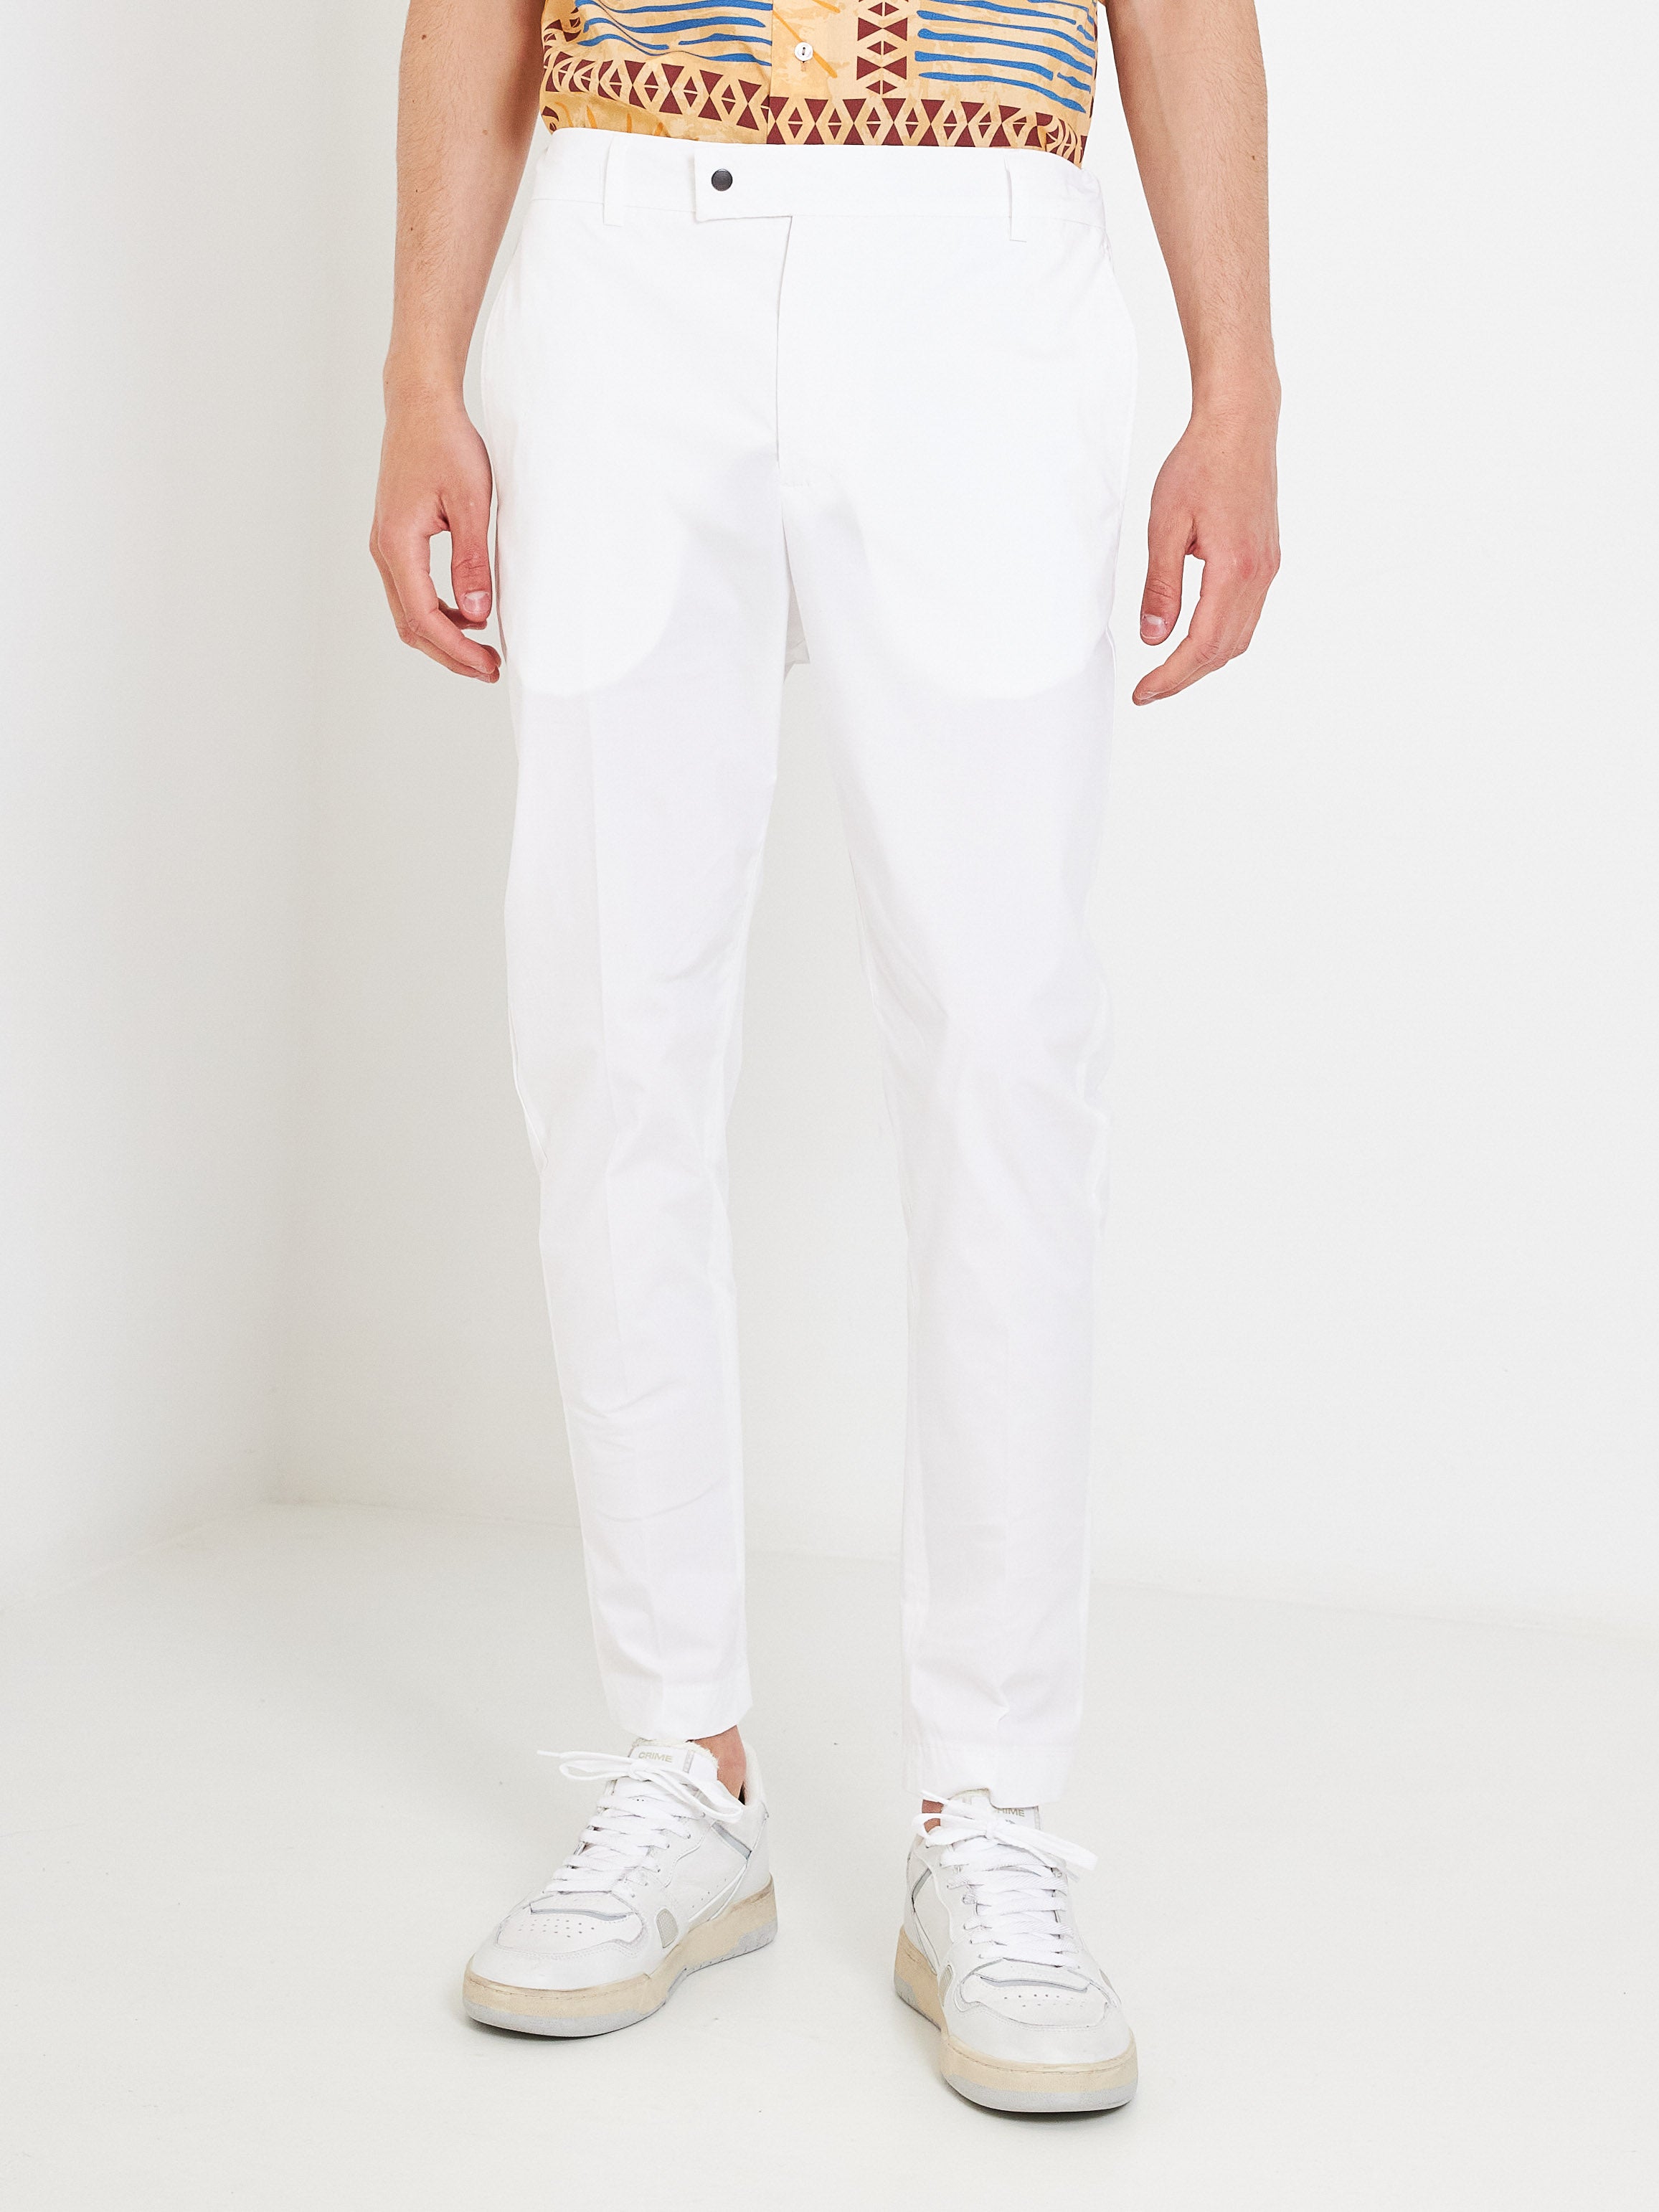 White Over white trousers